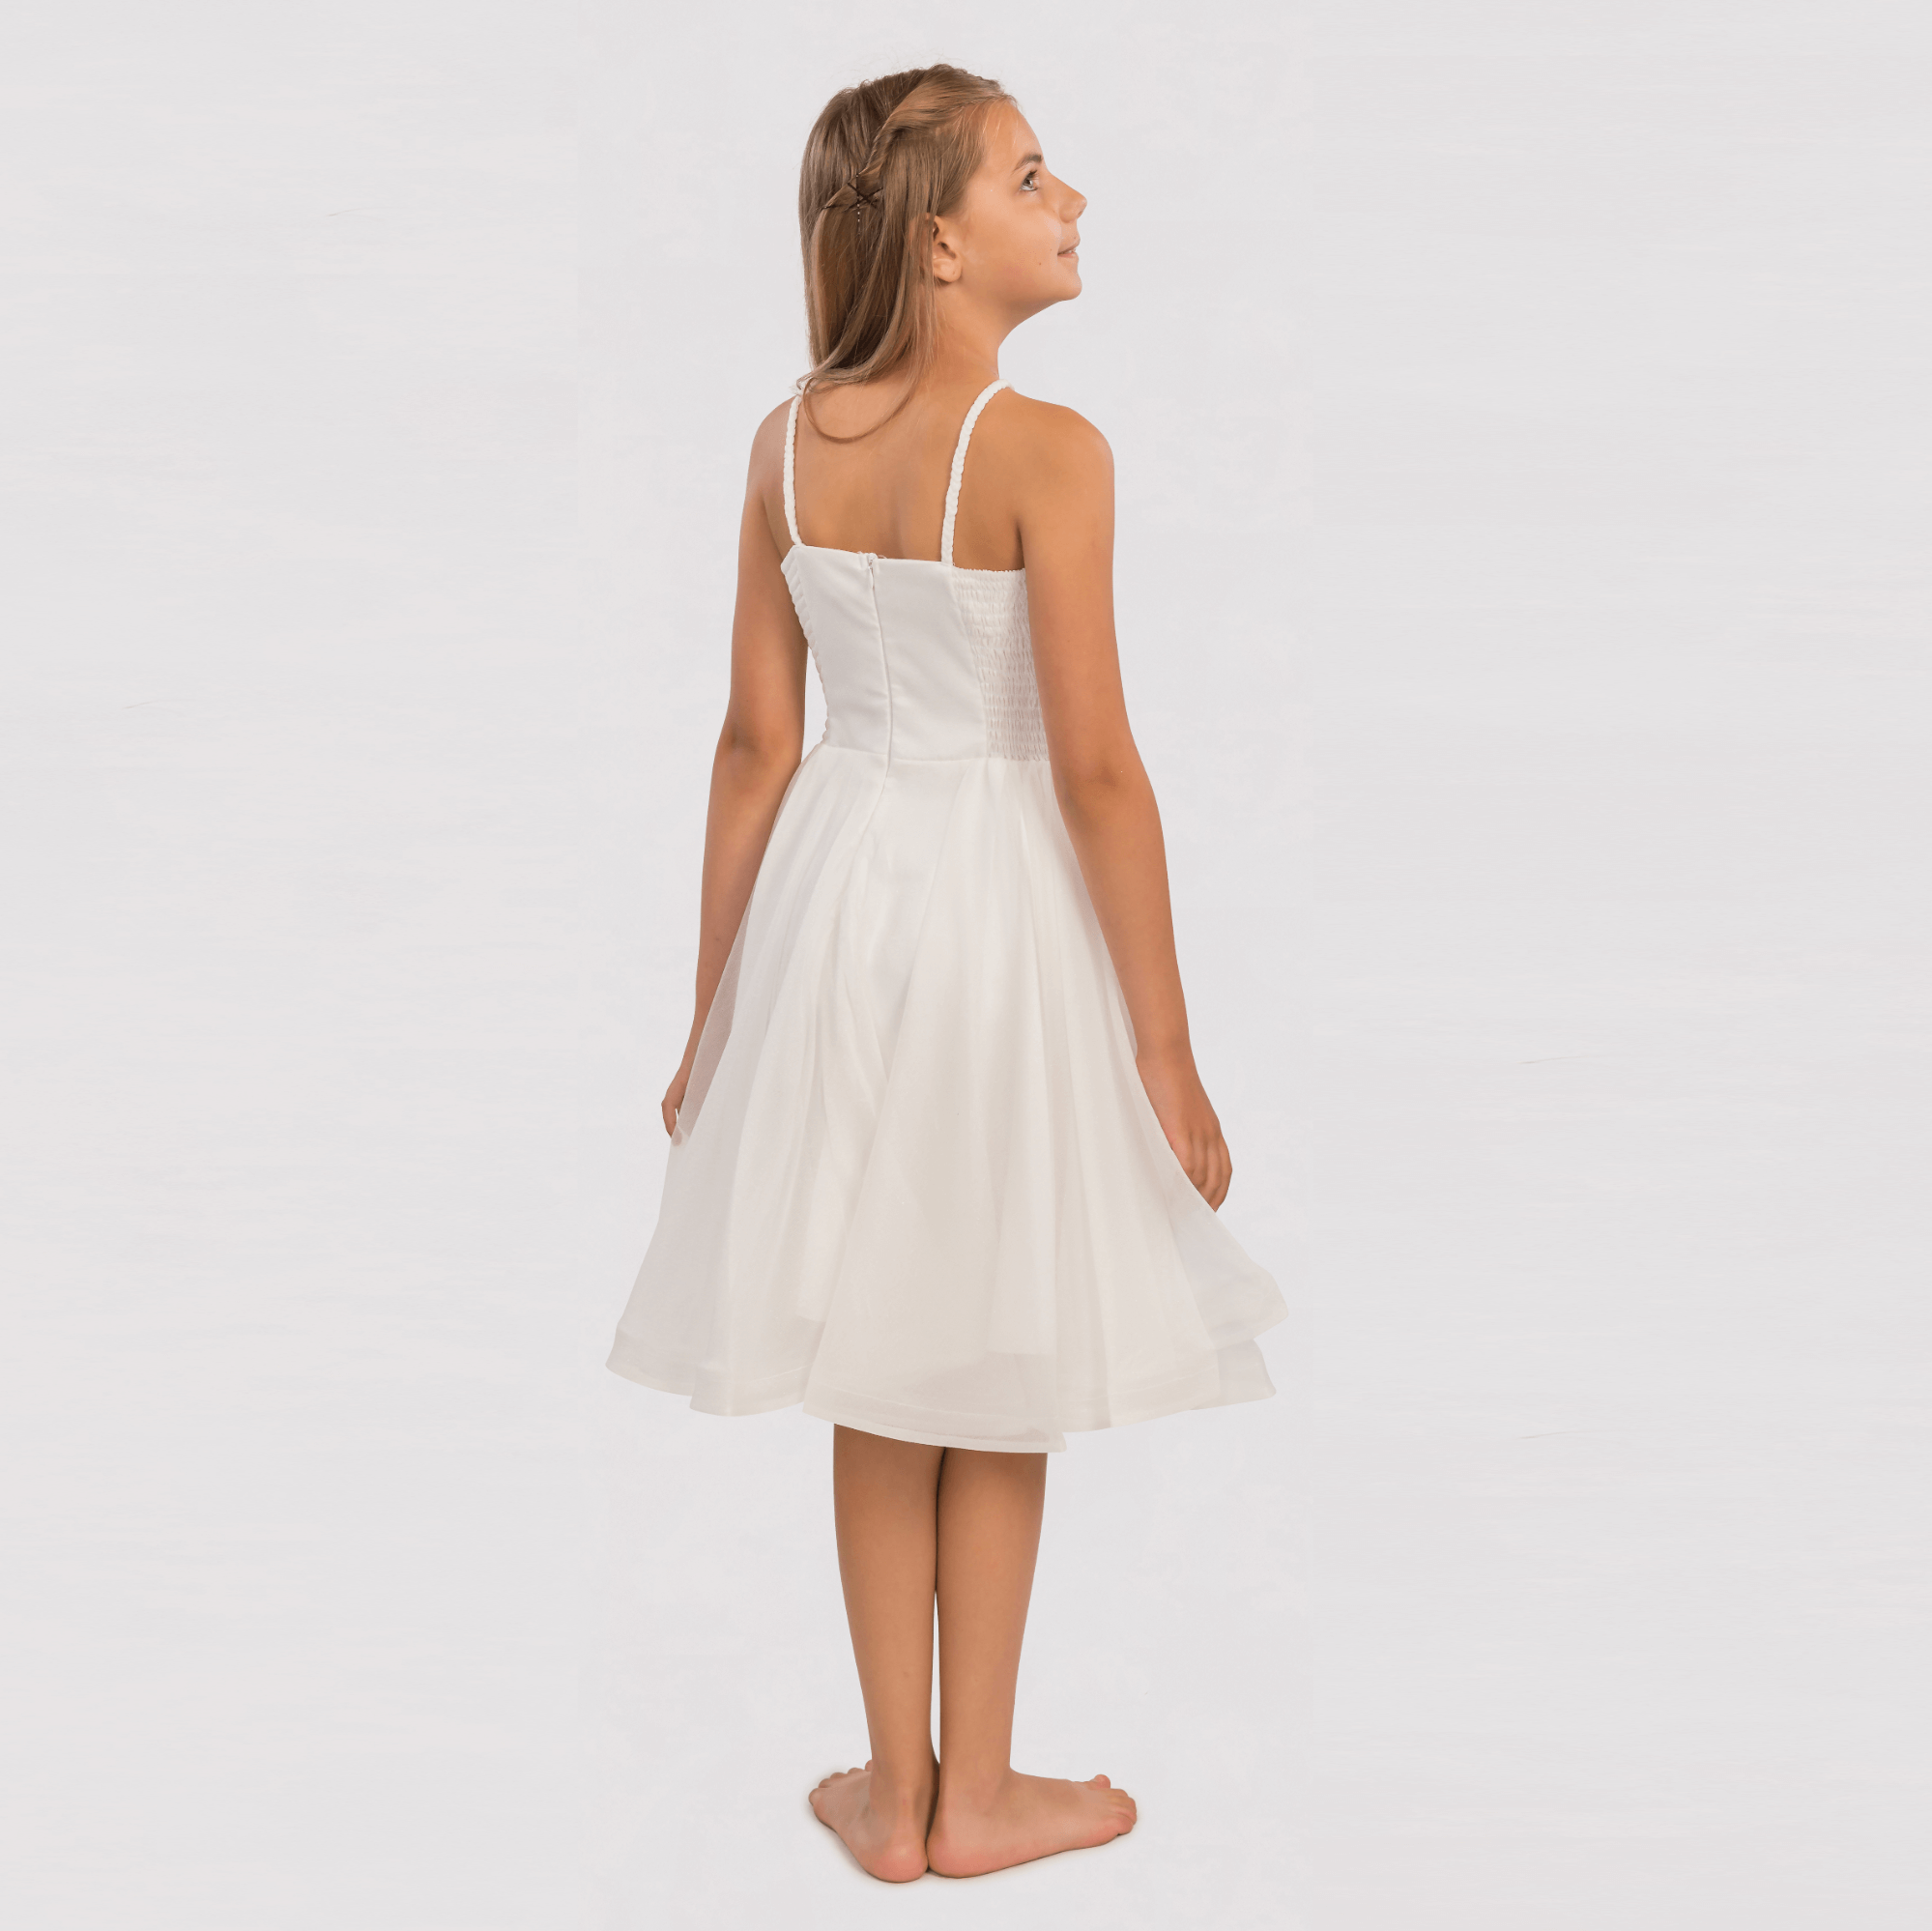 Lily's Gown Girls Formal Dress